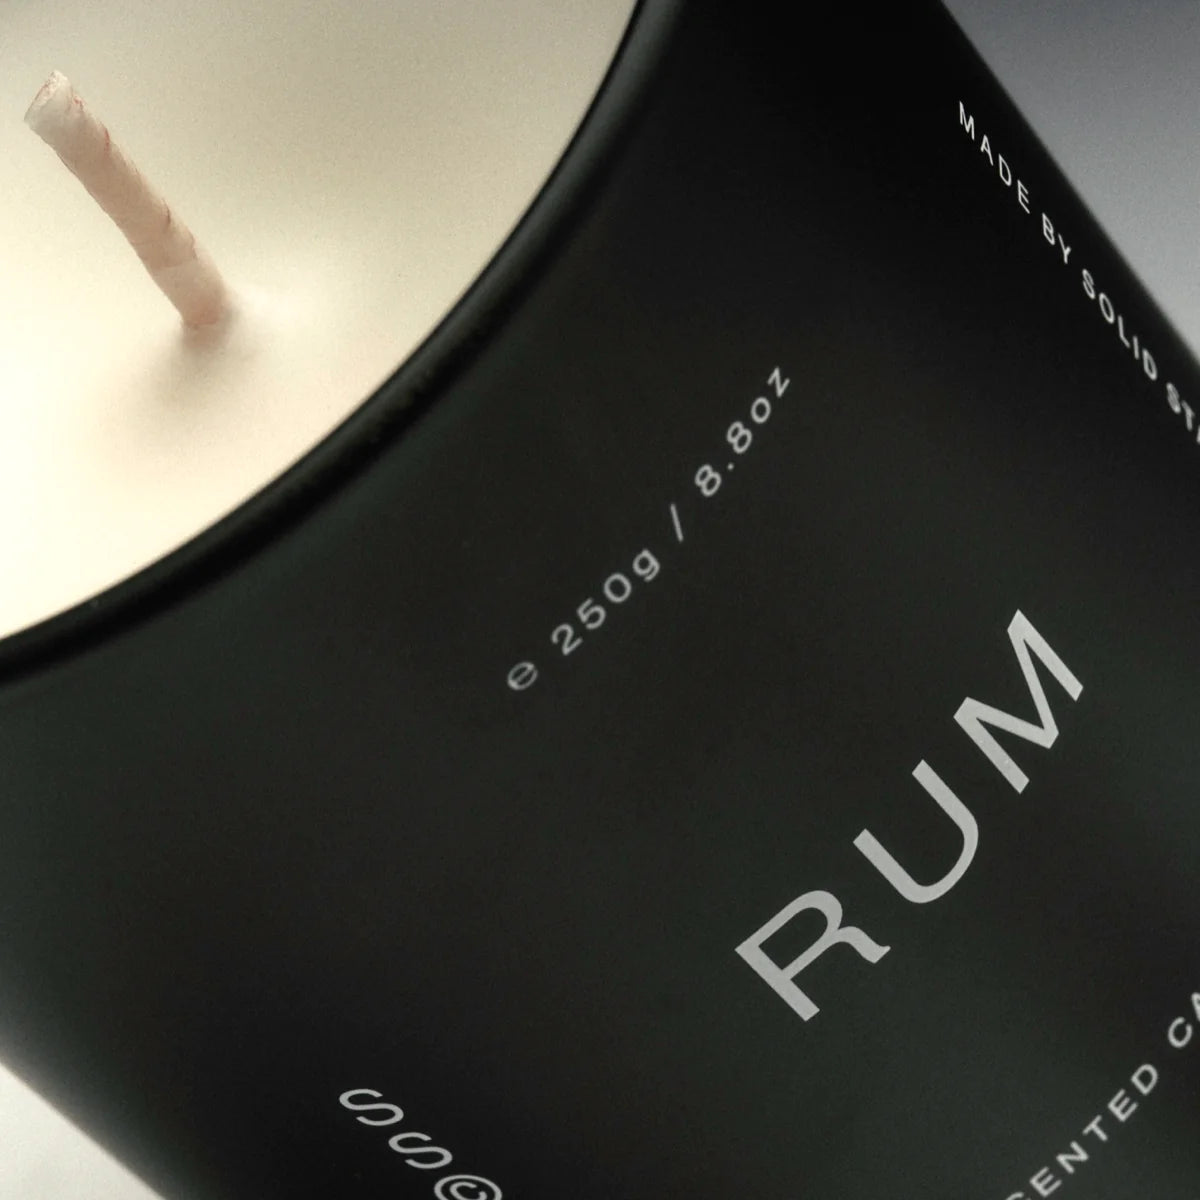 Solid State Scented Candle - Rum